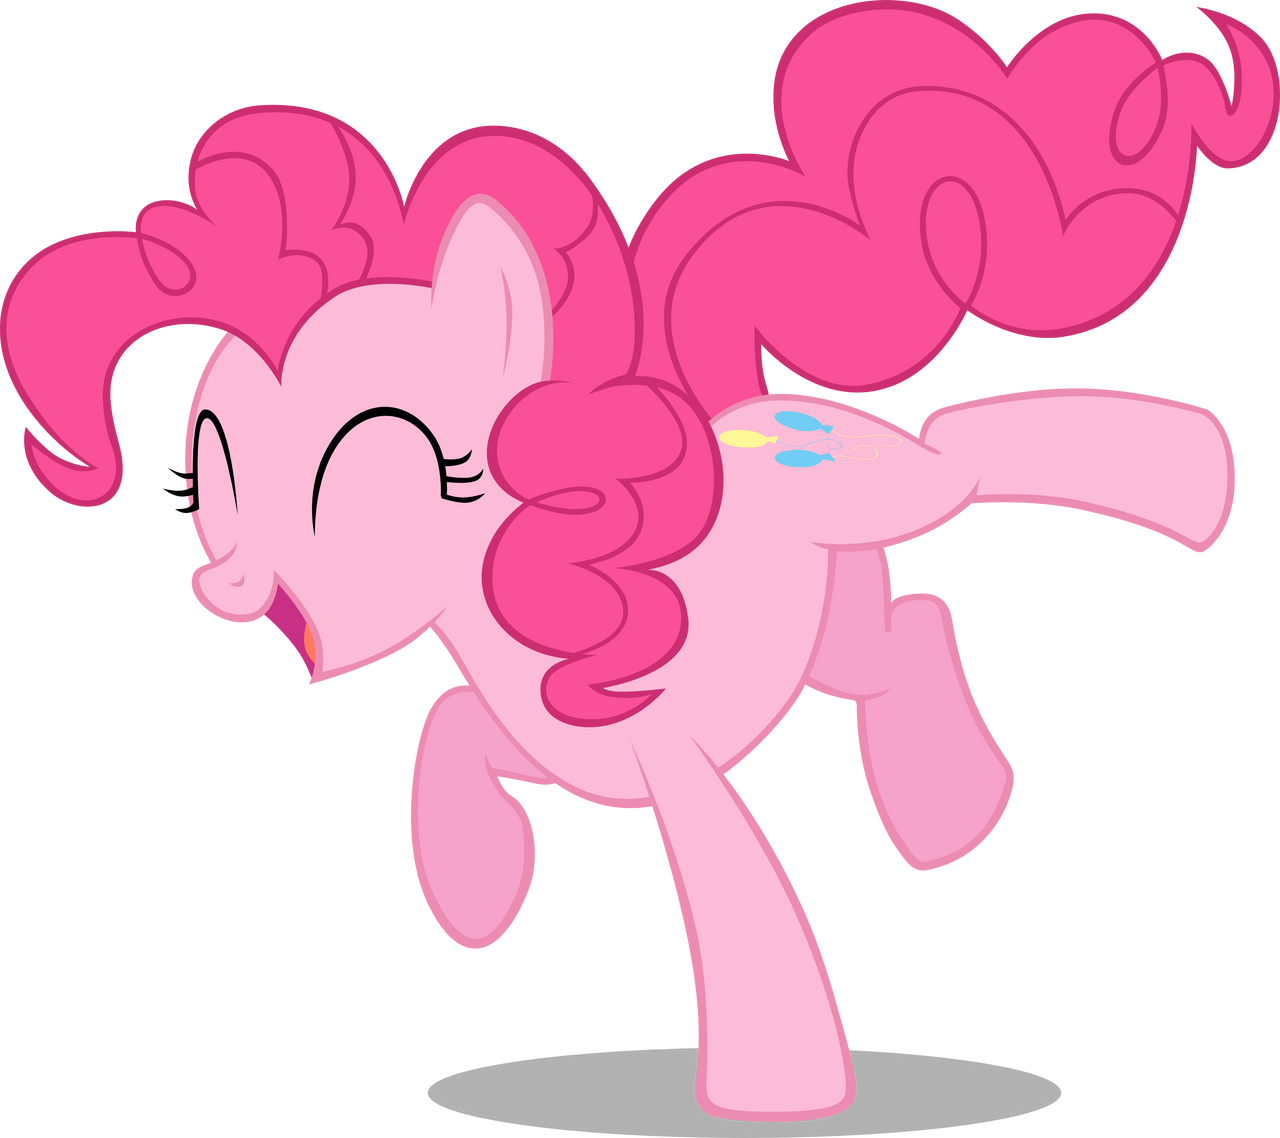 http://img08.deviantart.net/a58b/i/2012/276/f/6/pinkie_pie__party_time_by_takua770-d4jg1pe.png